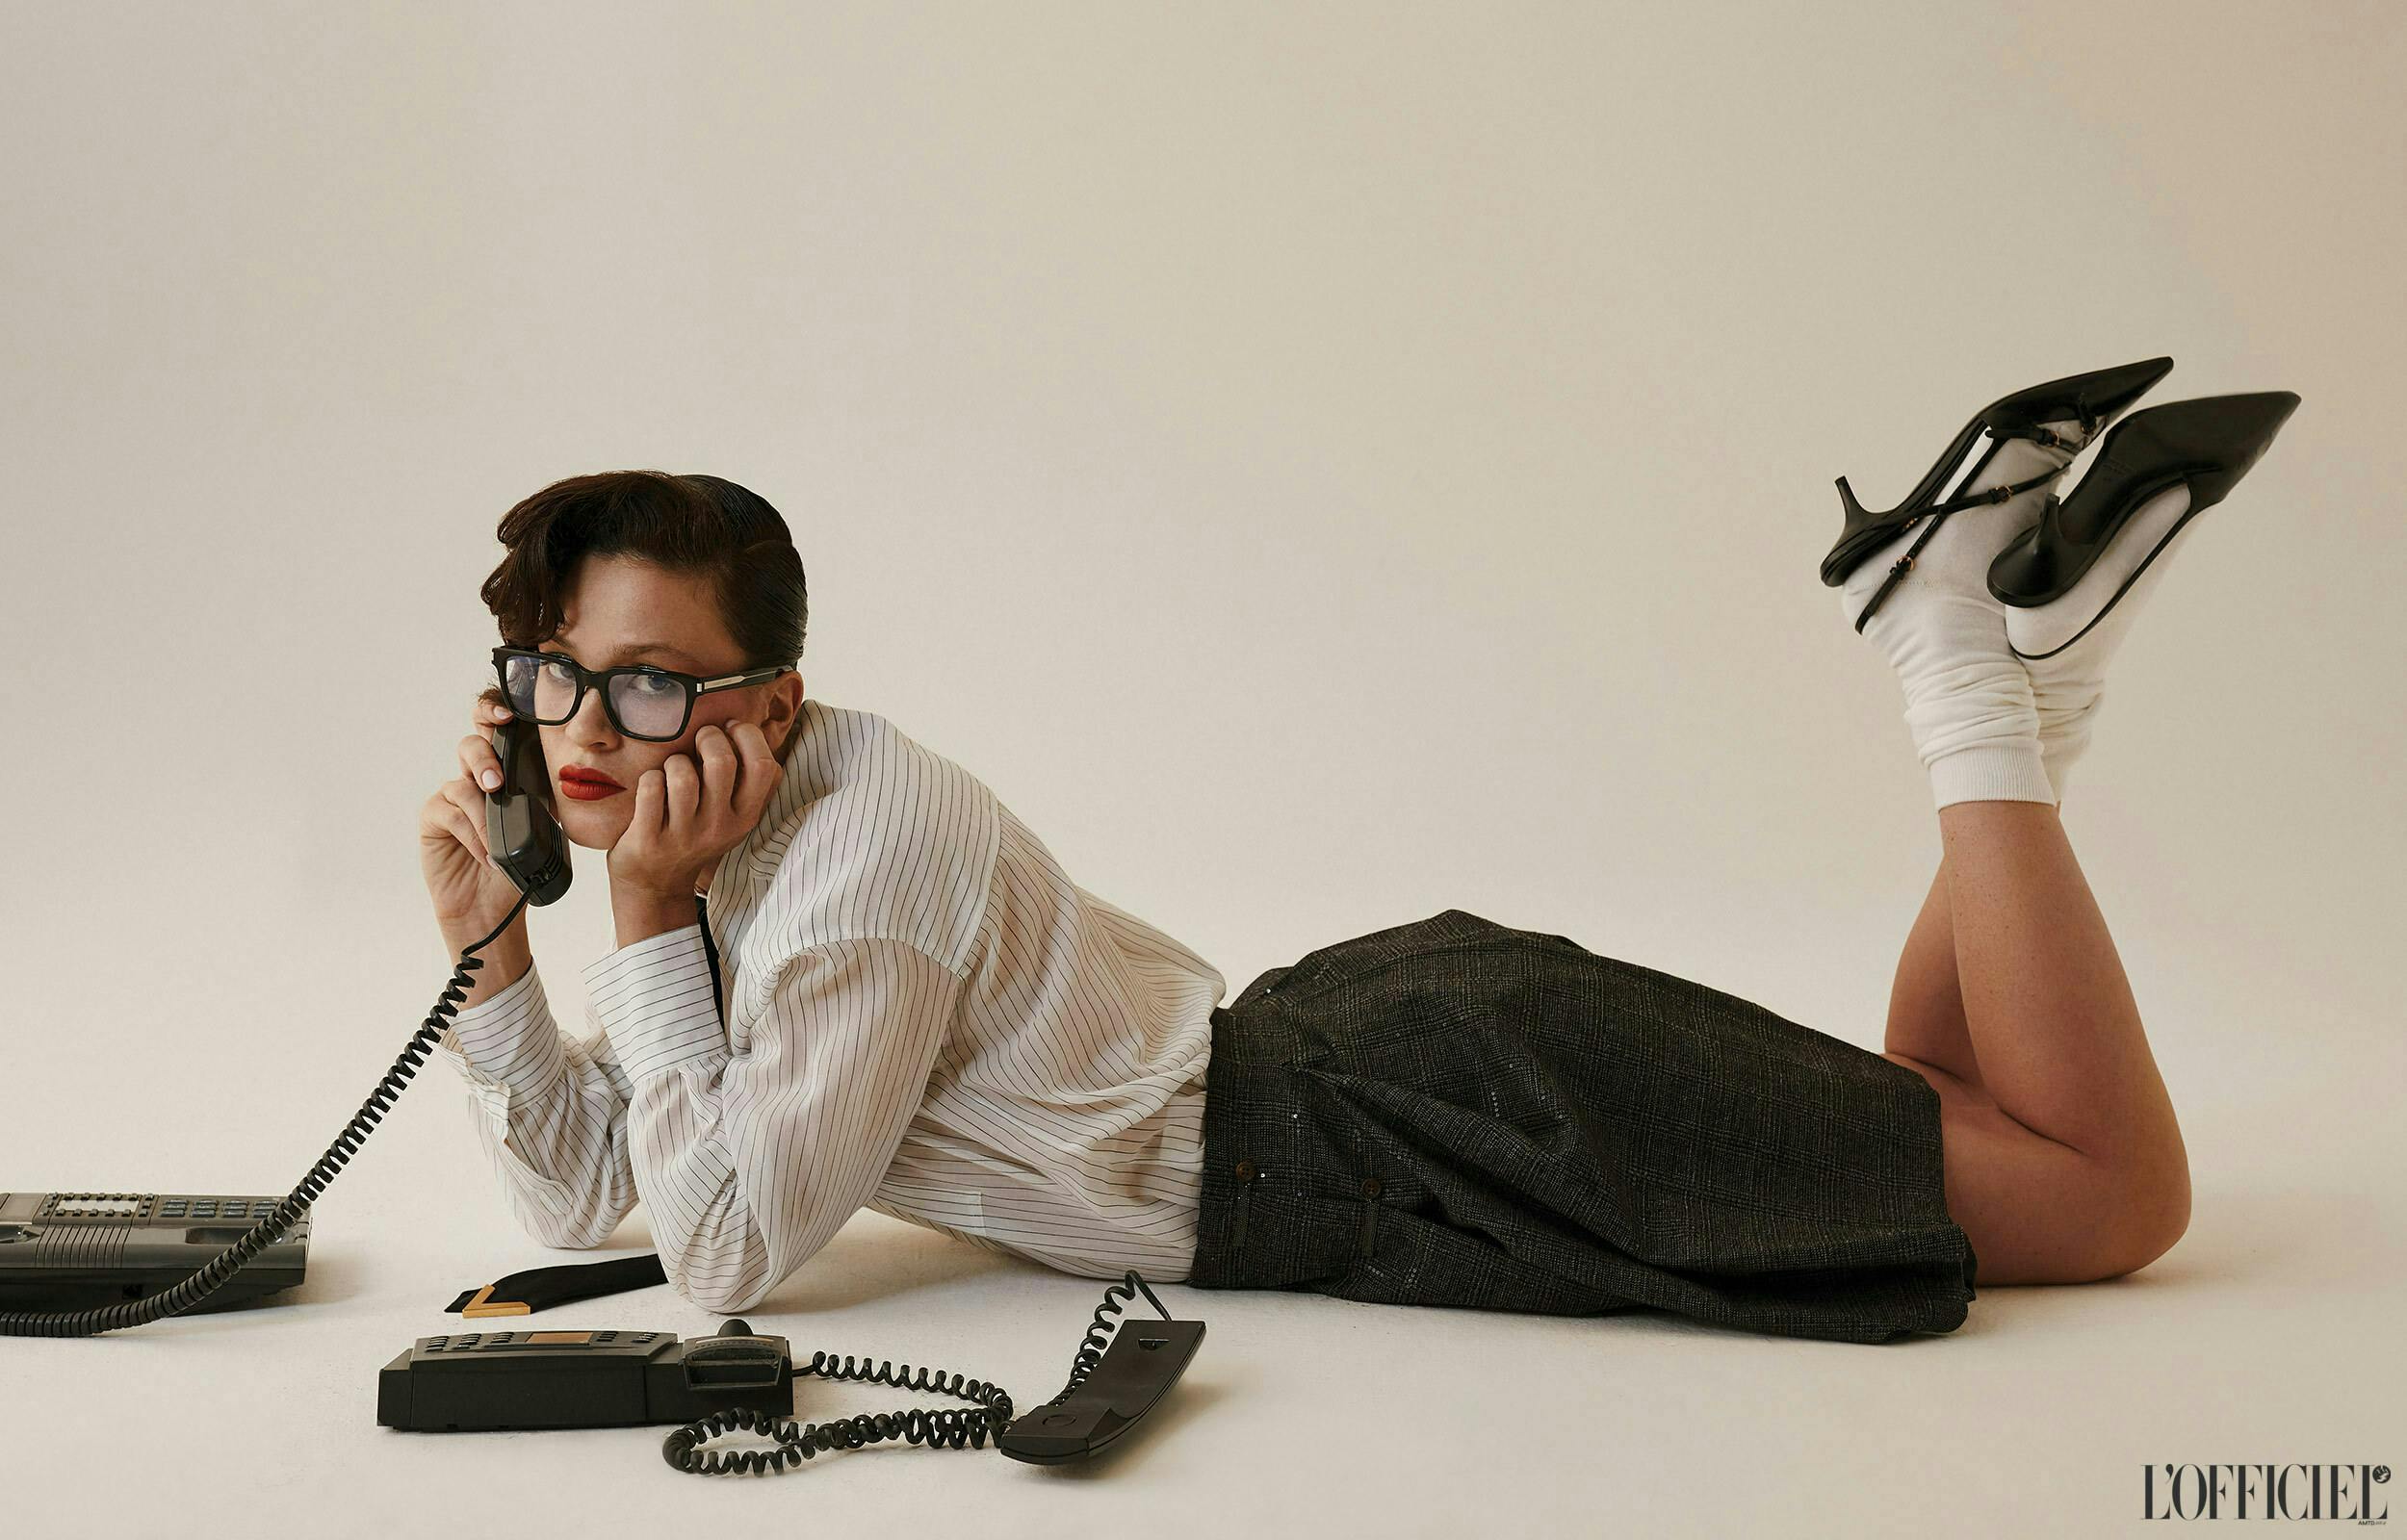 Model holding a landline phone in a shirst, skirt, heels, and glasses